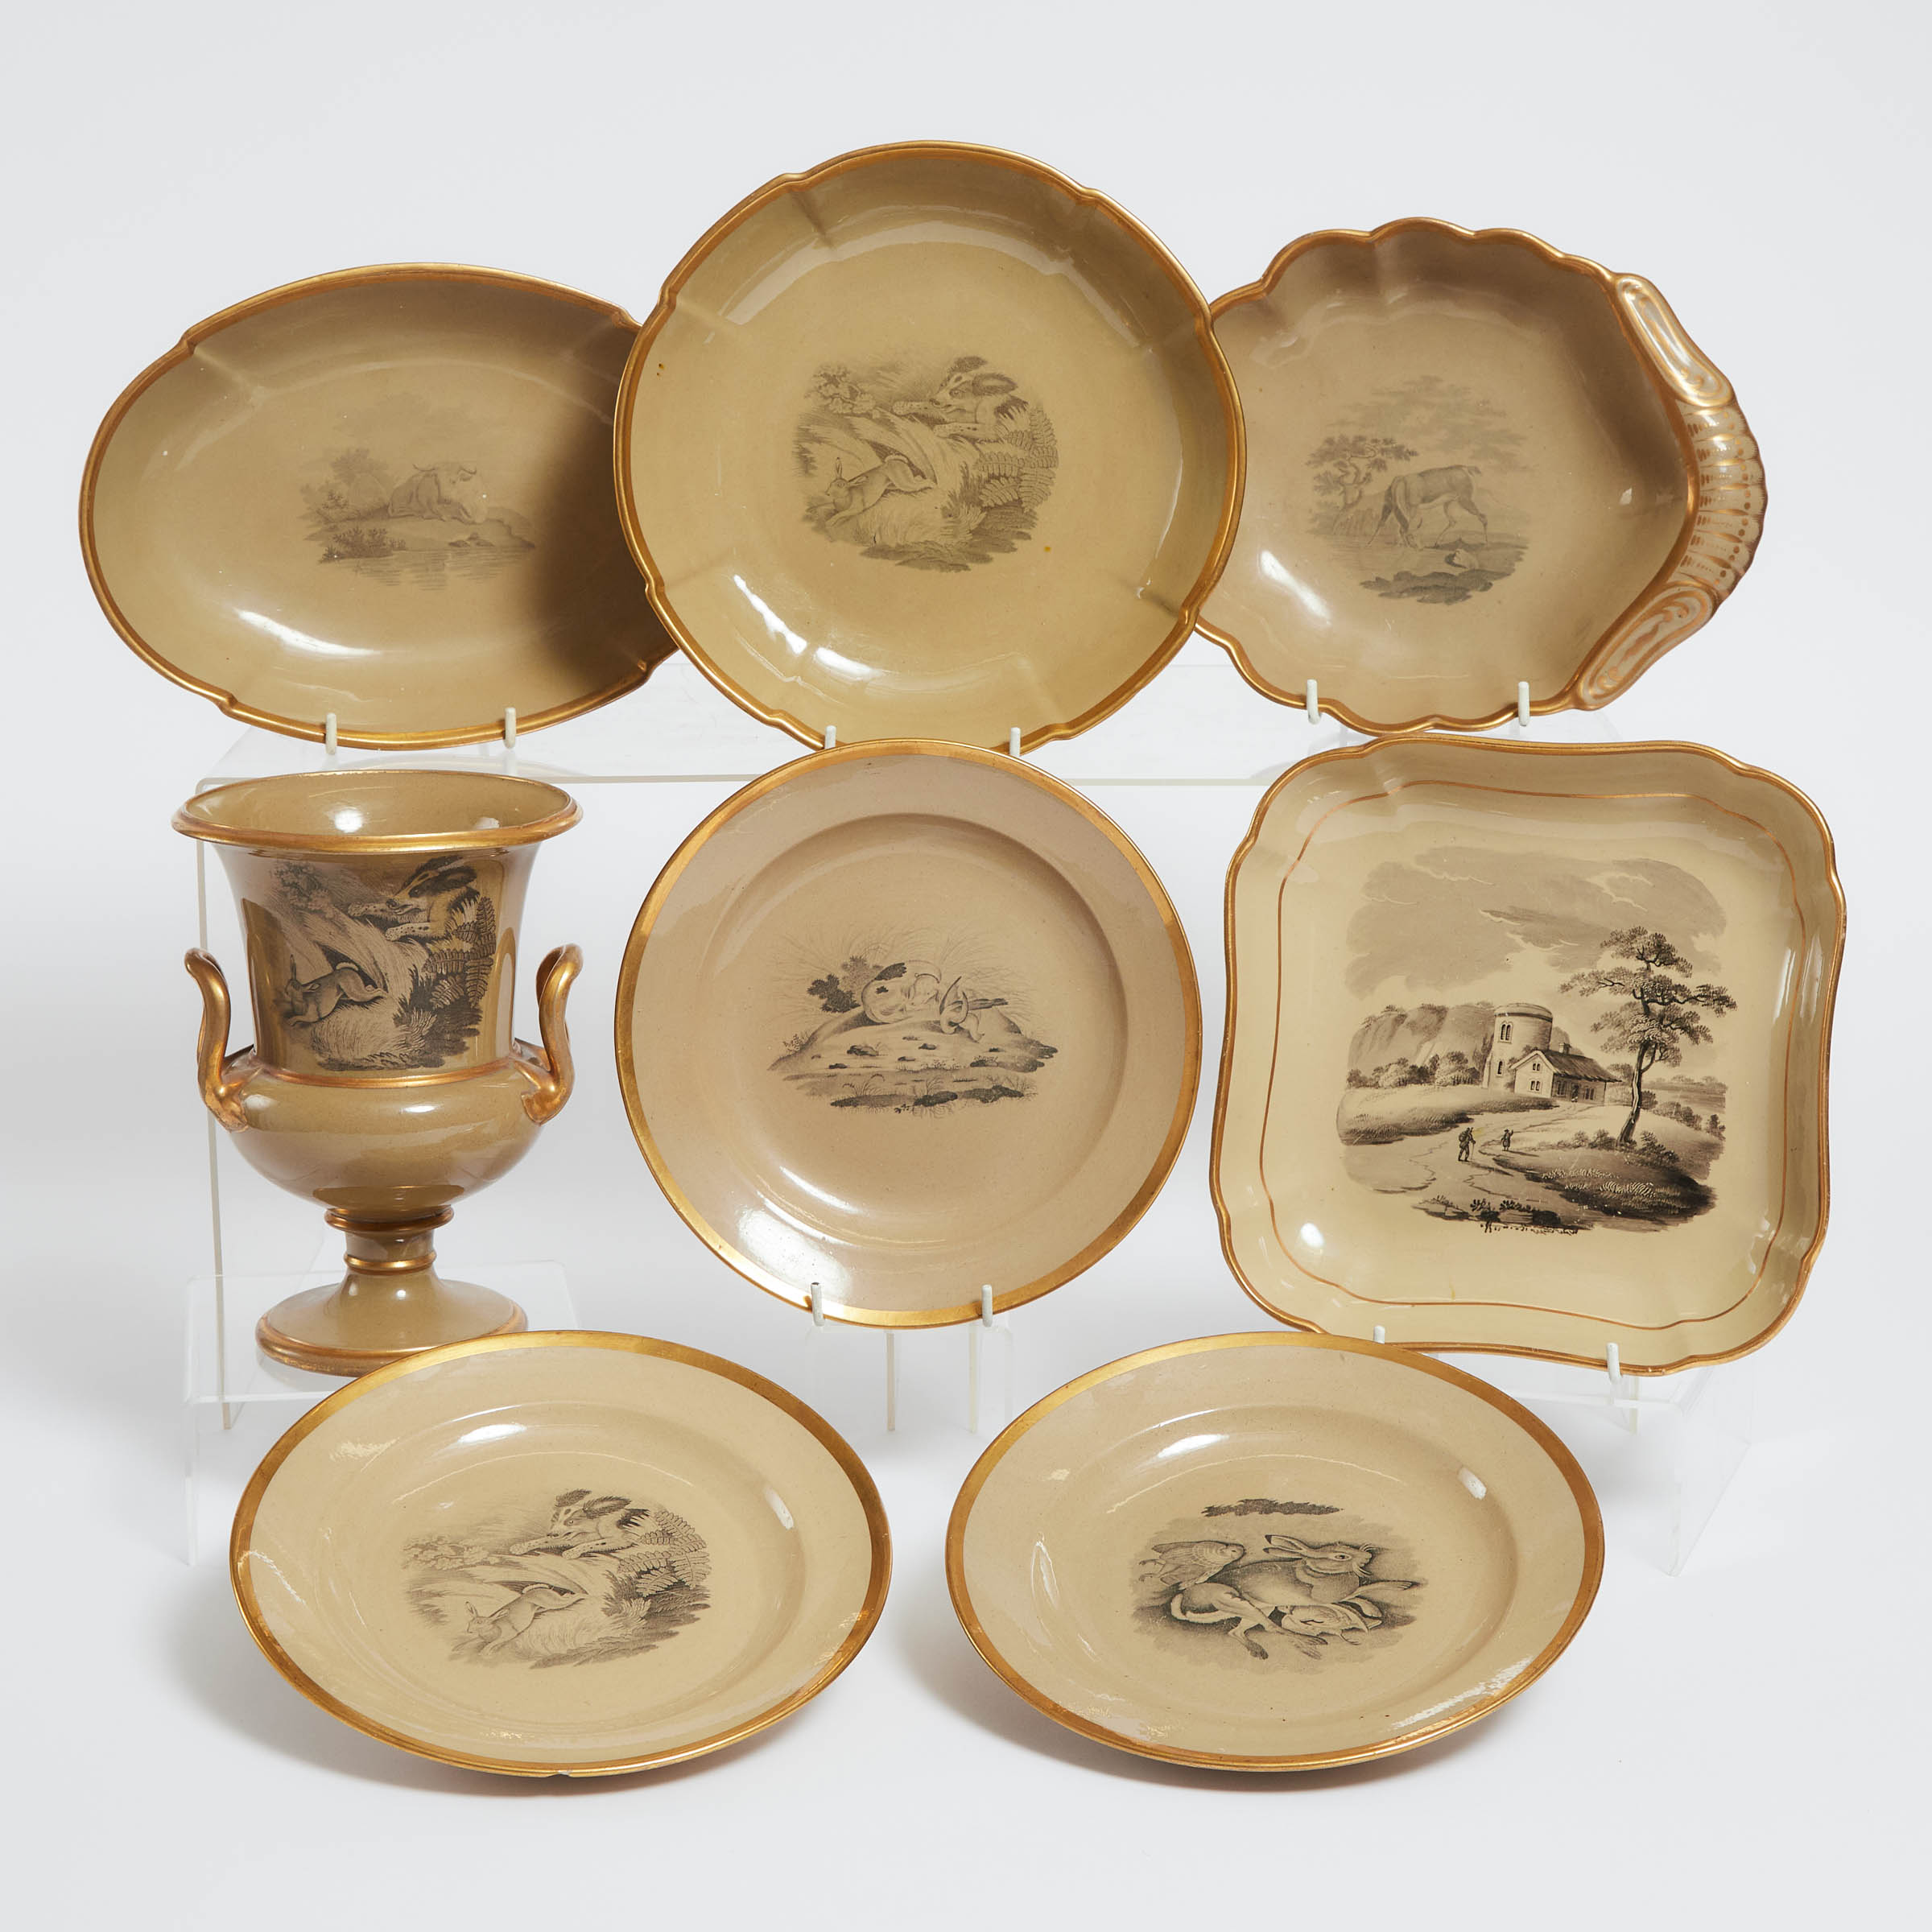 Spode Bat-Printed Drabware Two-Handled Vase, Four Serving Dishes, and Three Plates, early 19th century